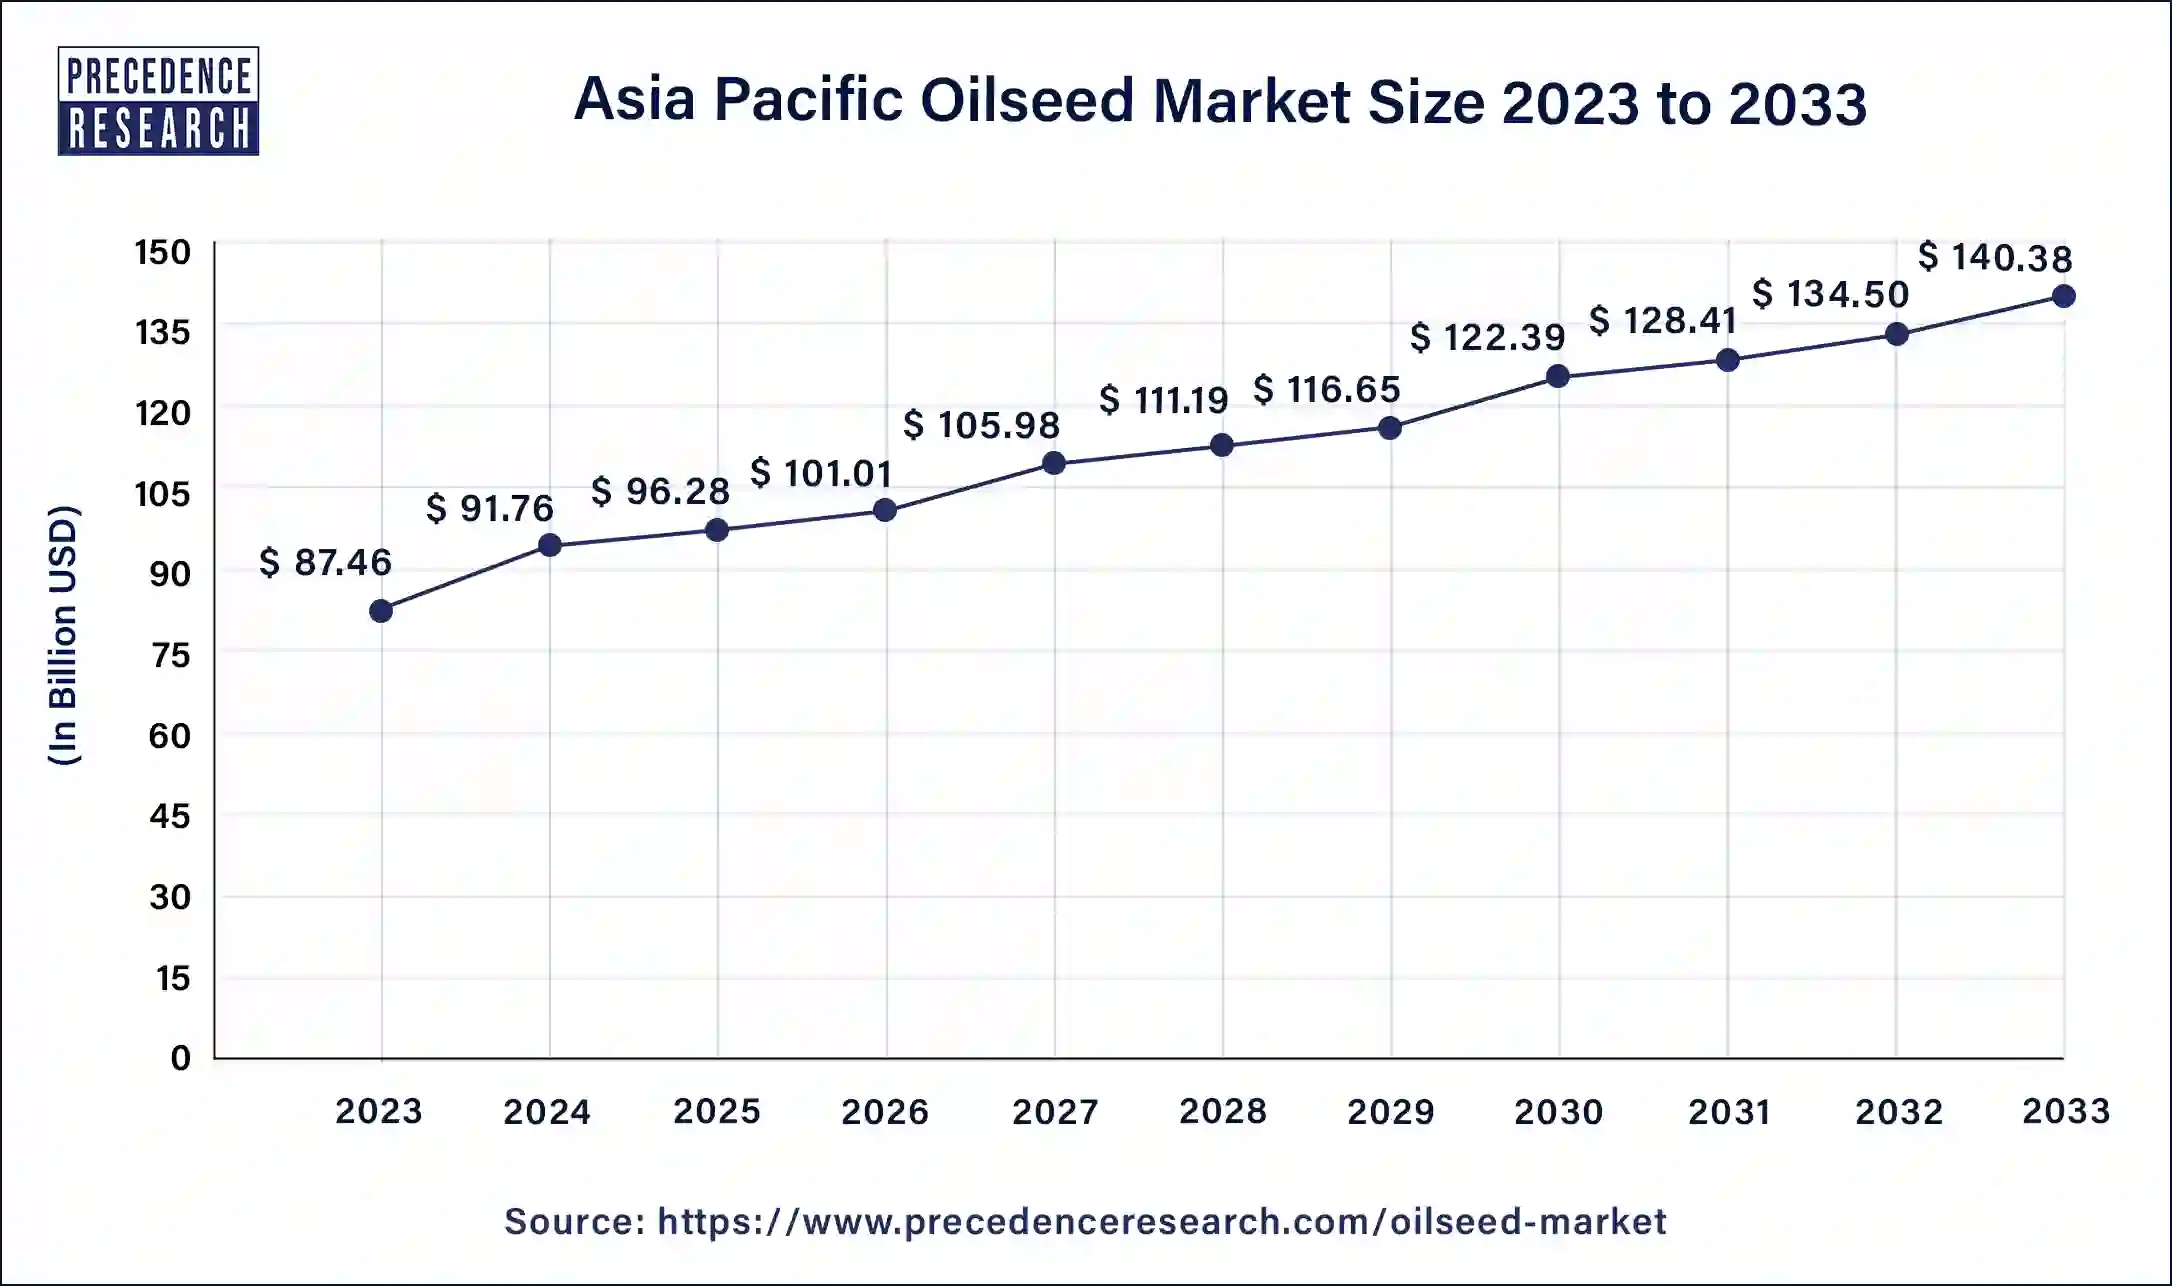 Asia Pacific Oilseed Market Size 2024 to 2033